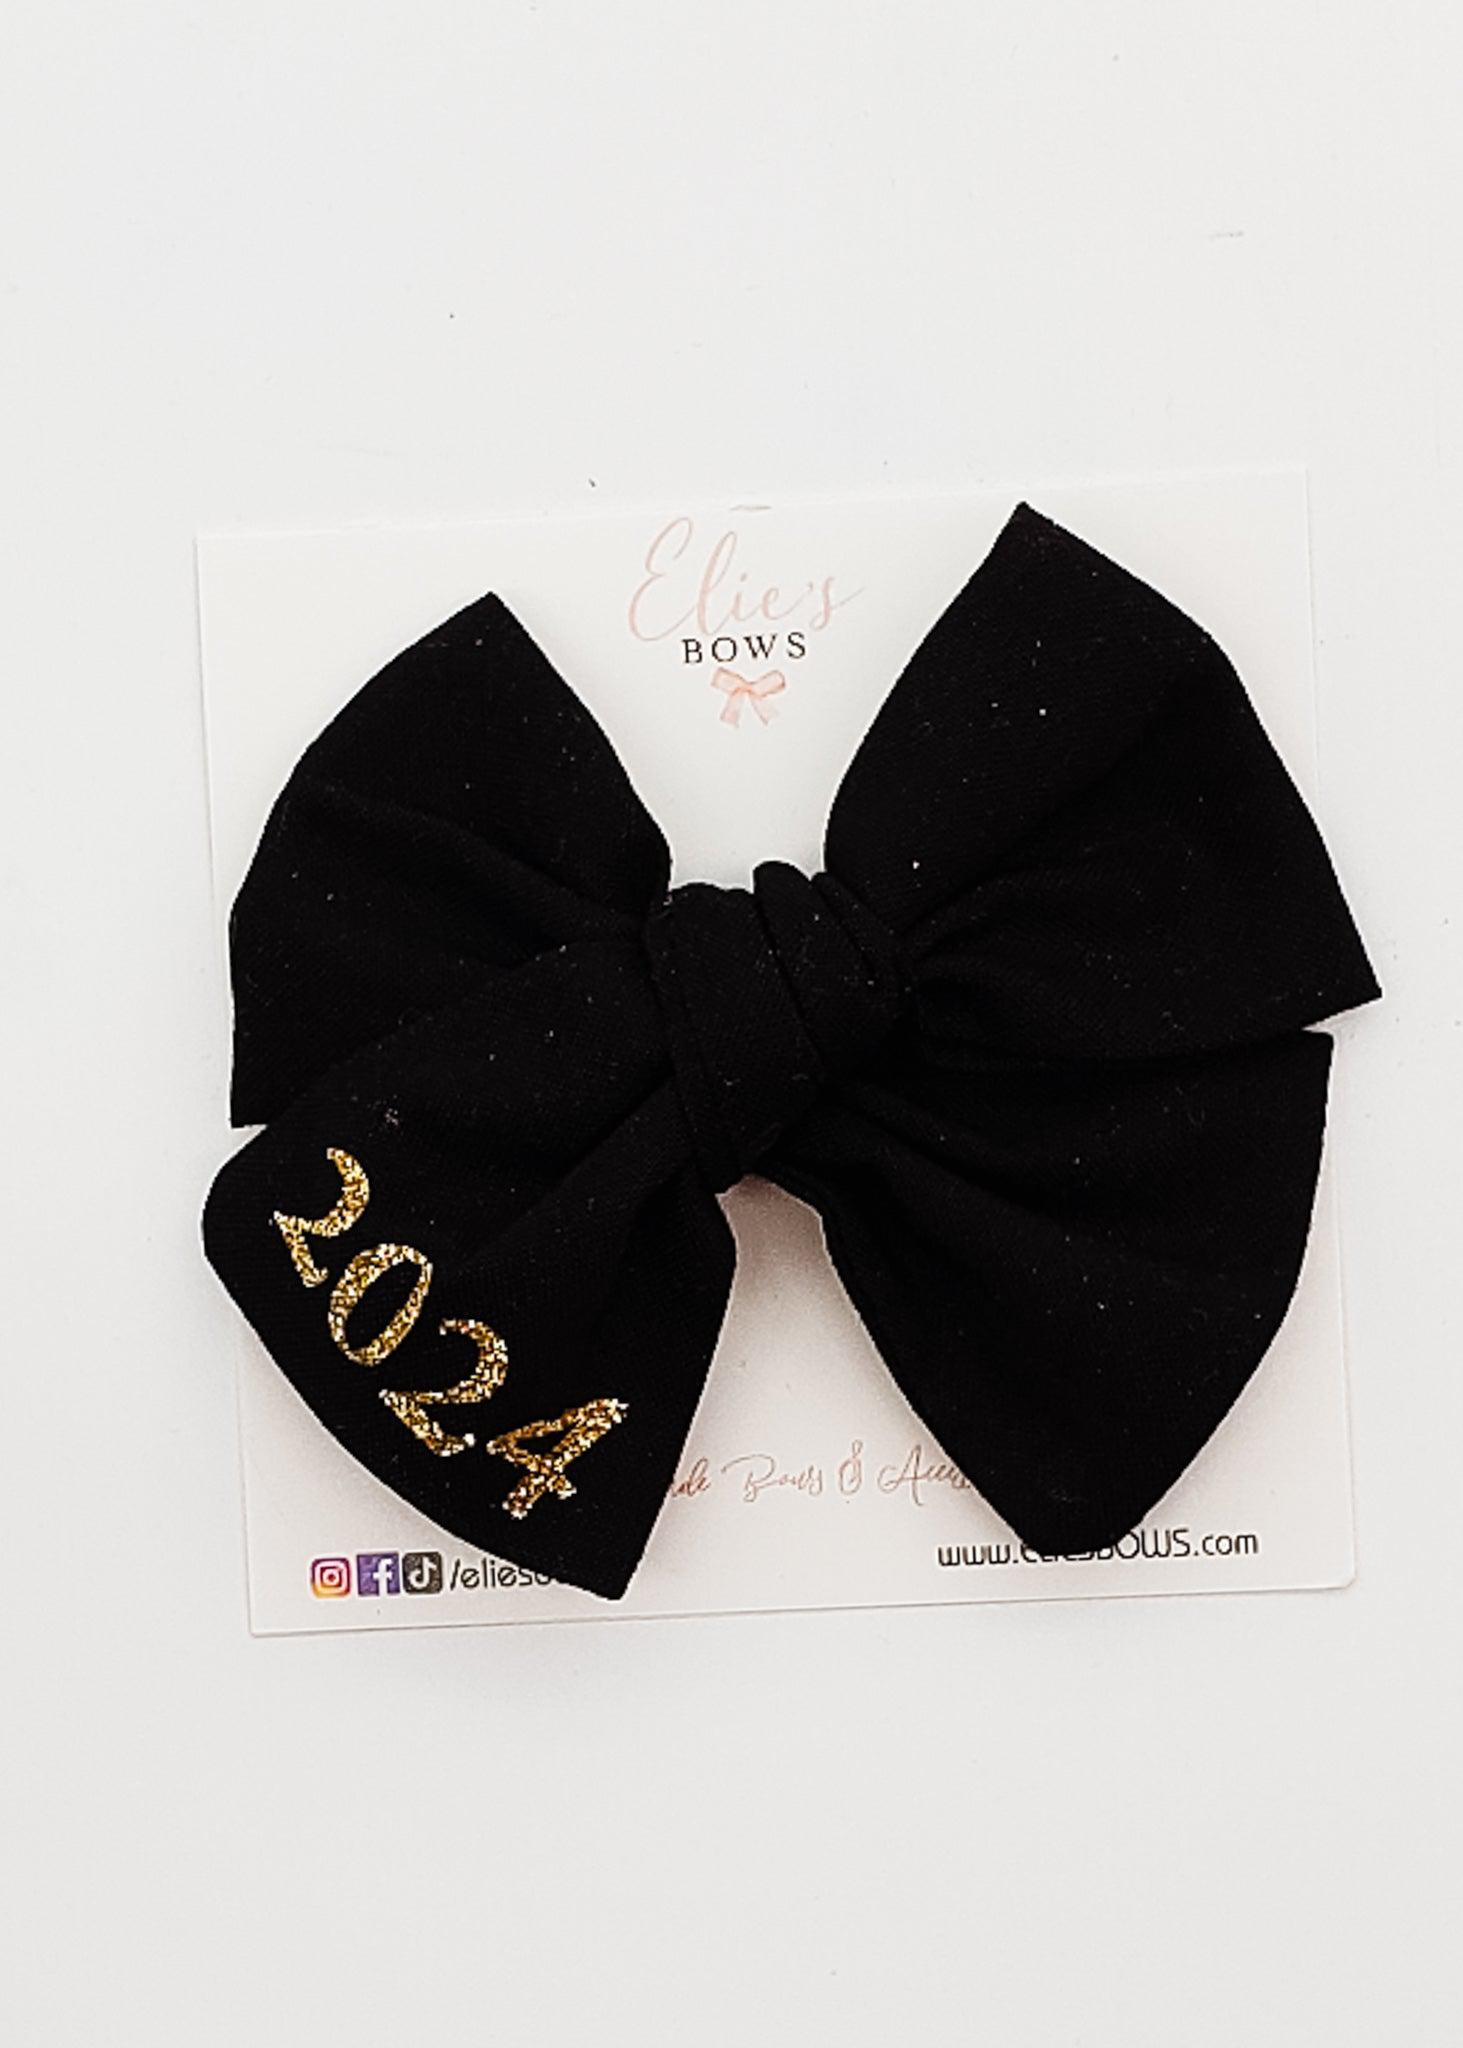 Black Personalized - Elie Fabric Bow - 3.5" (please include name in notes)-Bows-Elie’s Bows